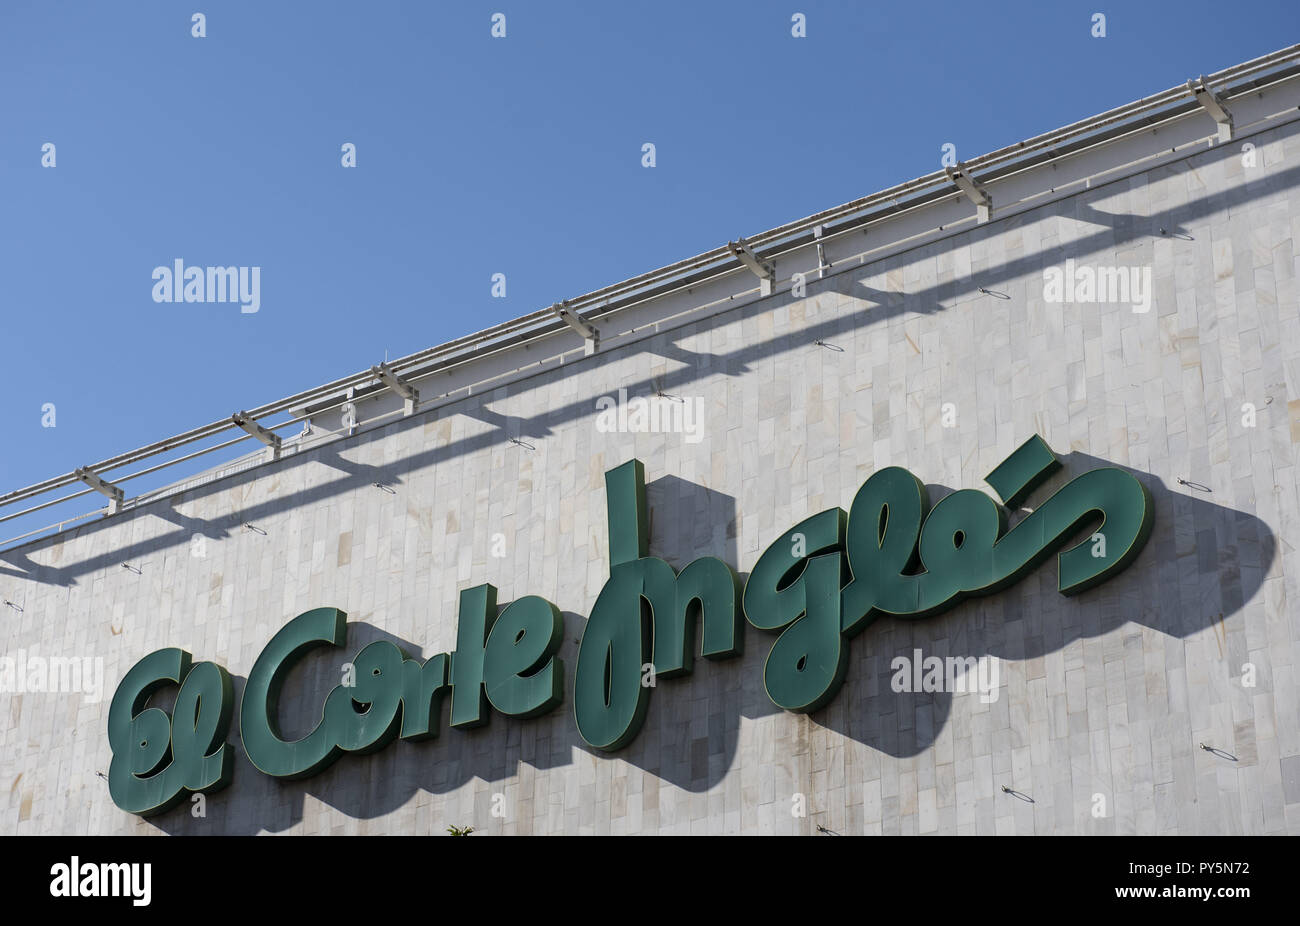 October 20, 2018 - Cordoba, Andalusia, Spain - Spanish biggest department store, El Corte InglÃ©s, is seen in Cordoba. (Credit Image: © Miguel Candela/SOPA Images via ZUMA Wire) Stock Photo